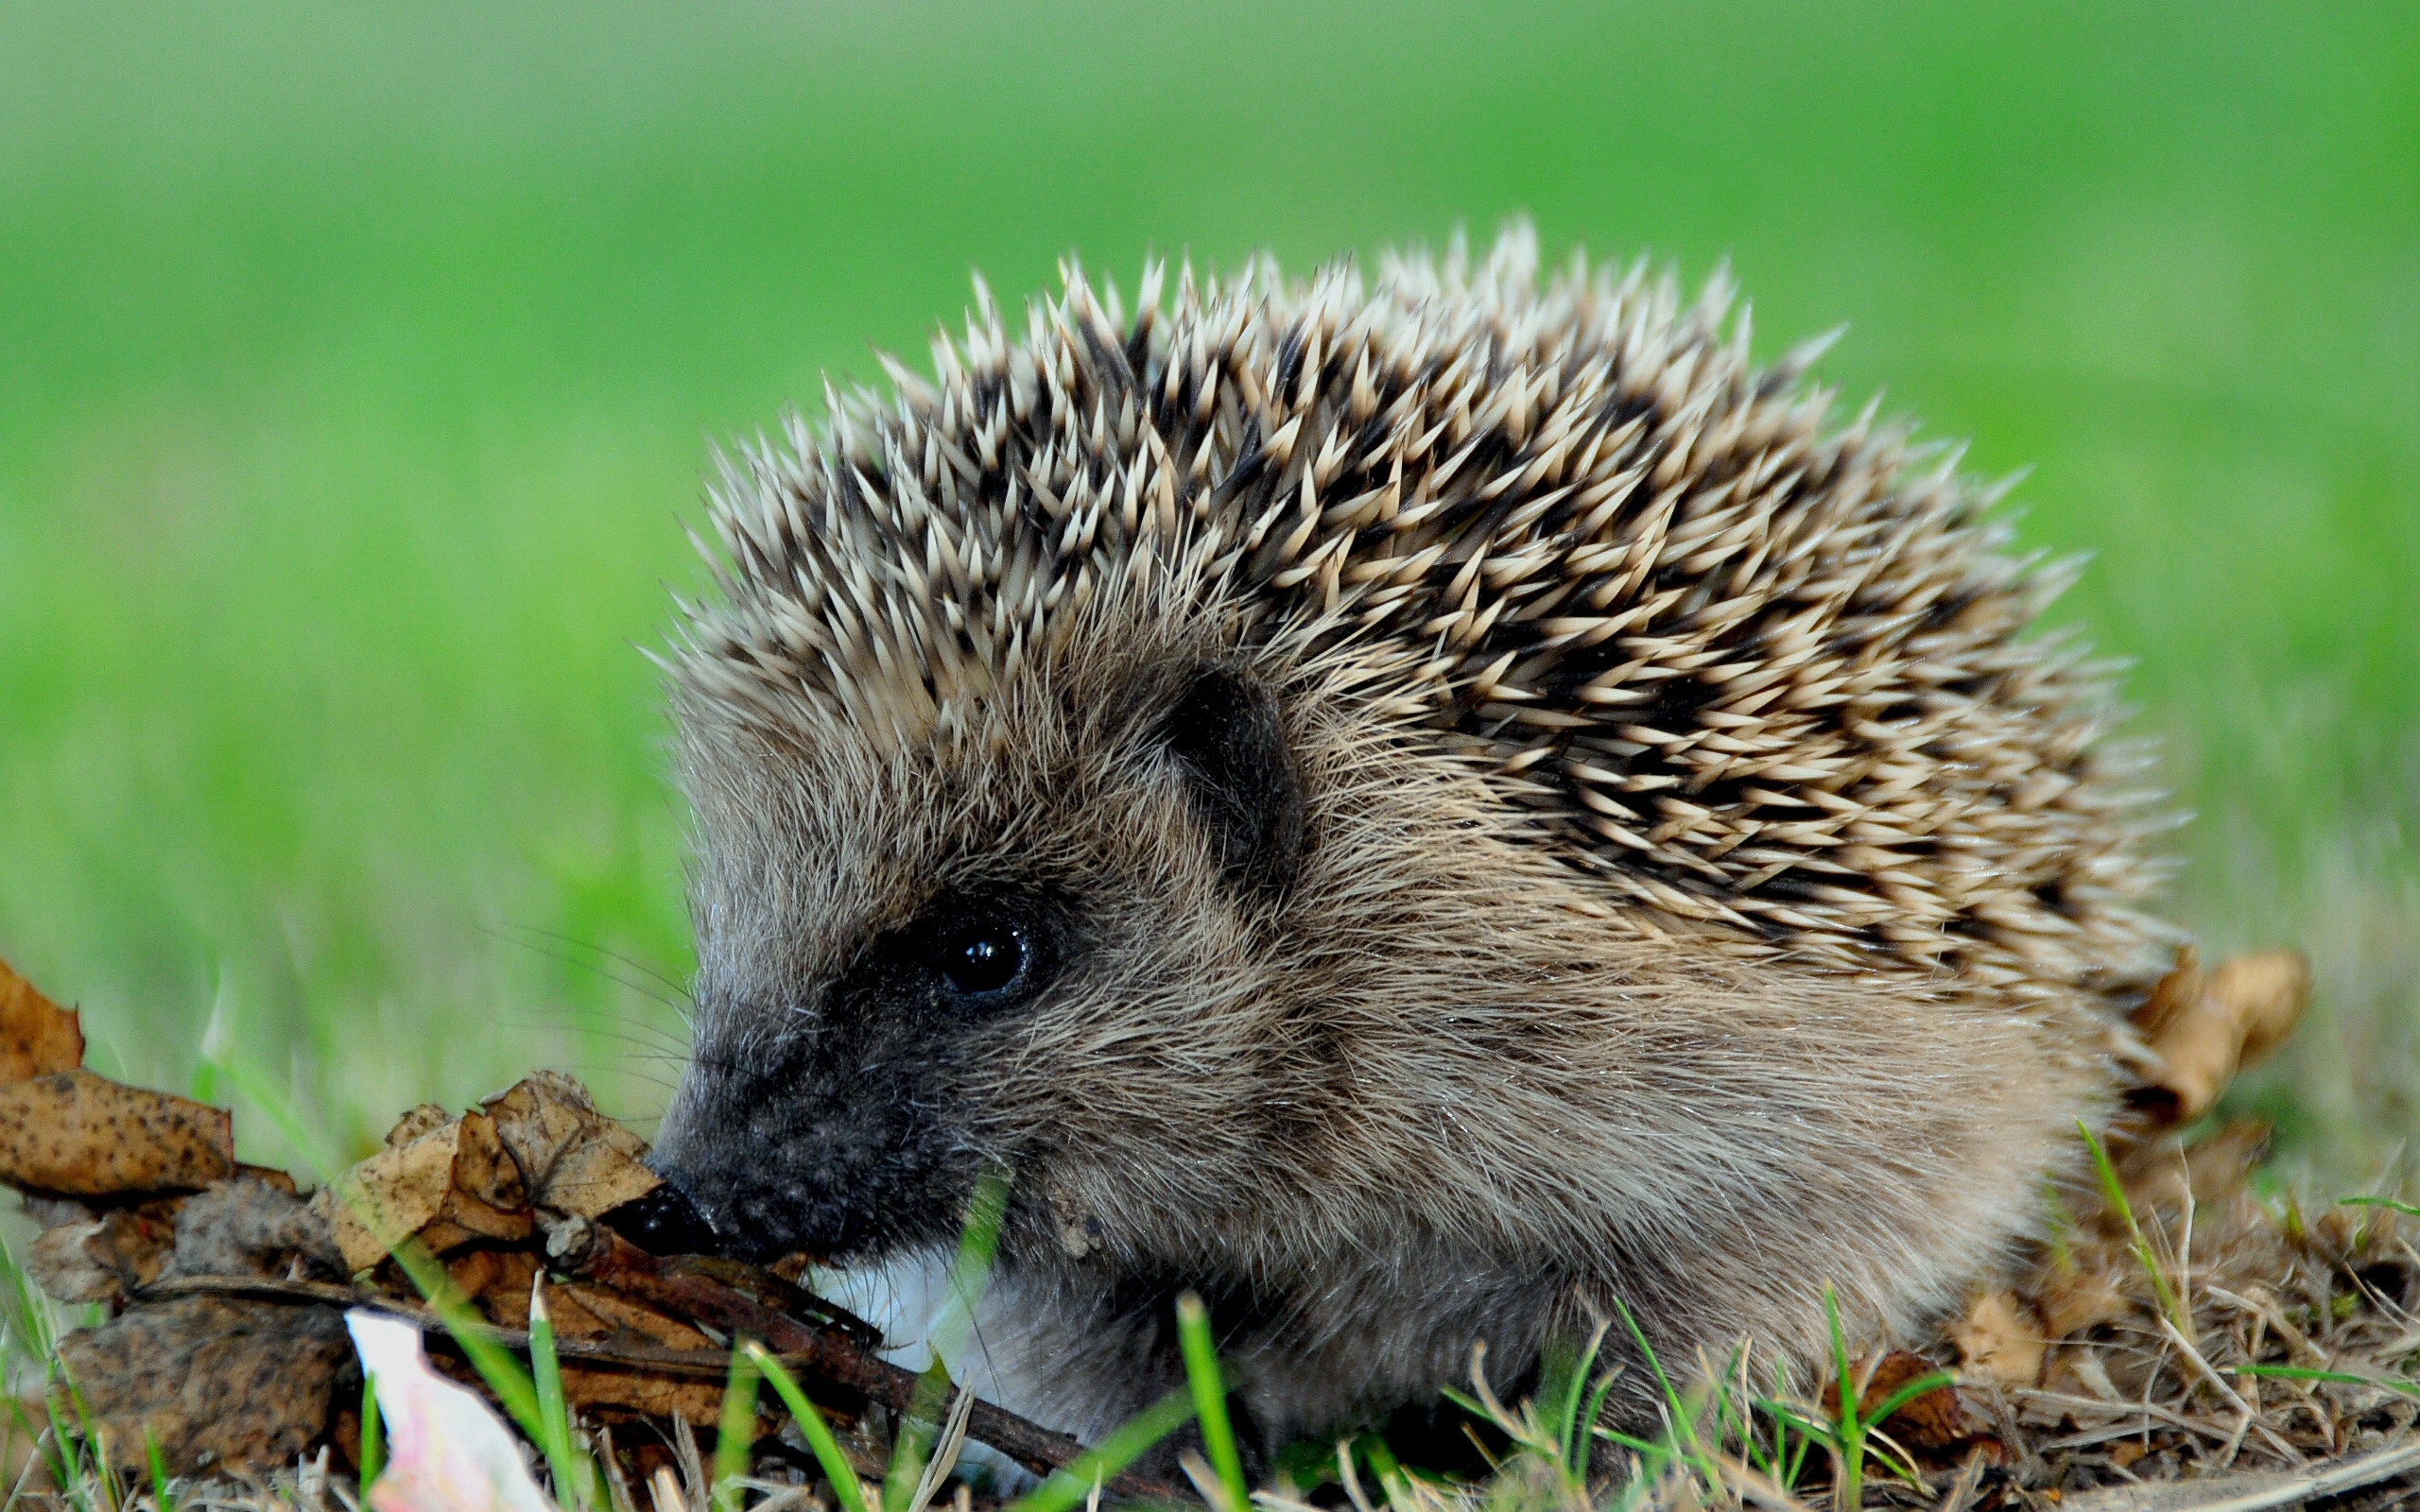 41032 download wallpaper animals, hedgehogs screensavers and pictures for free